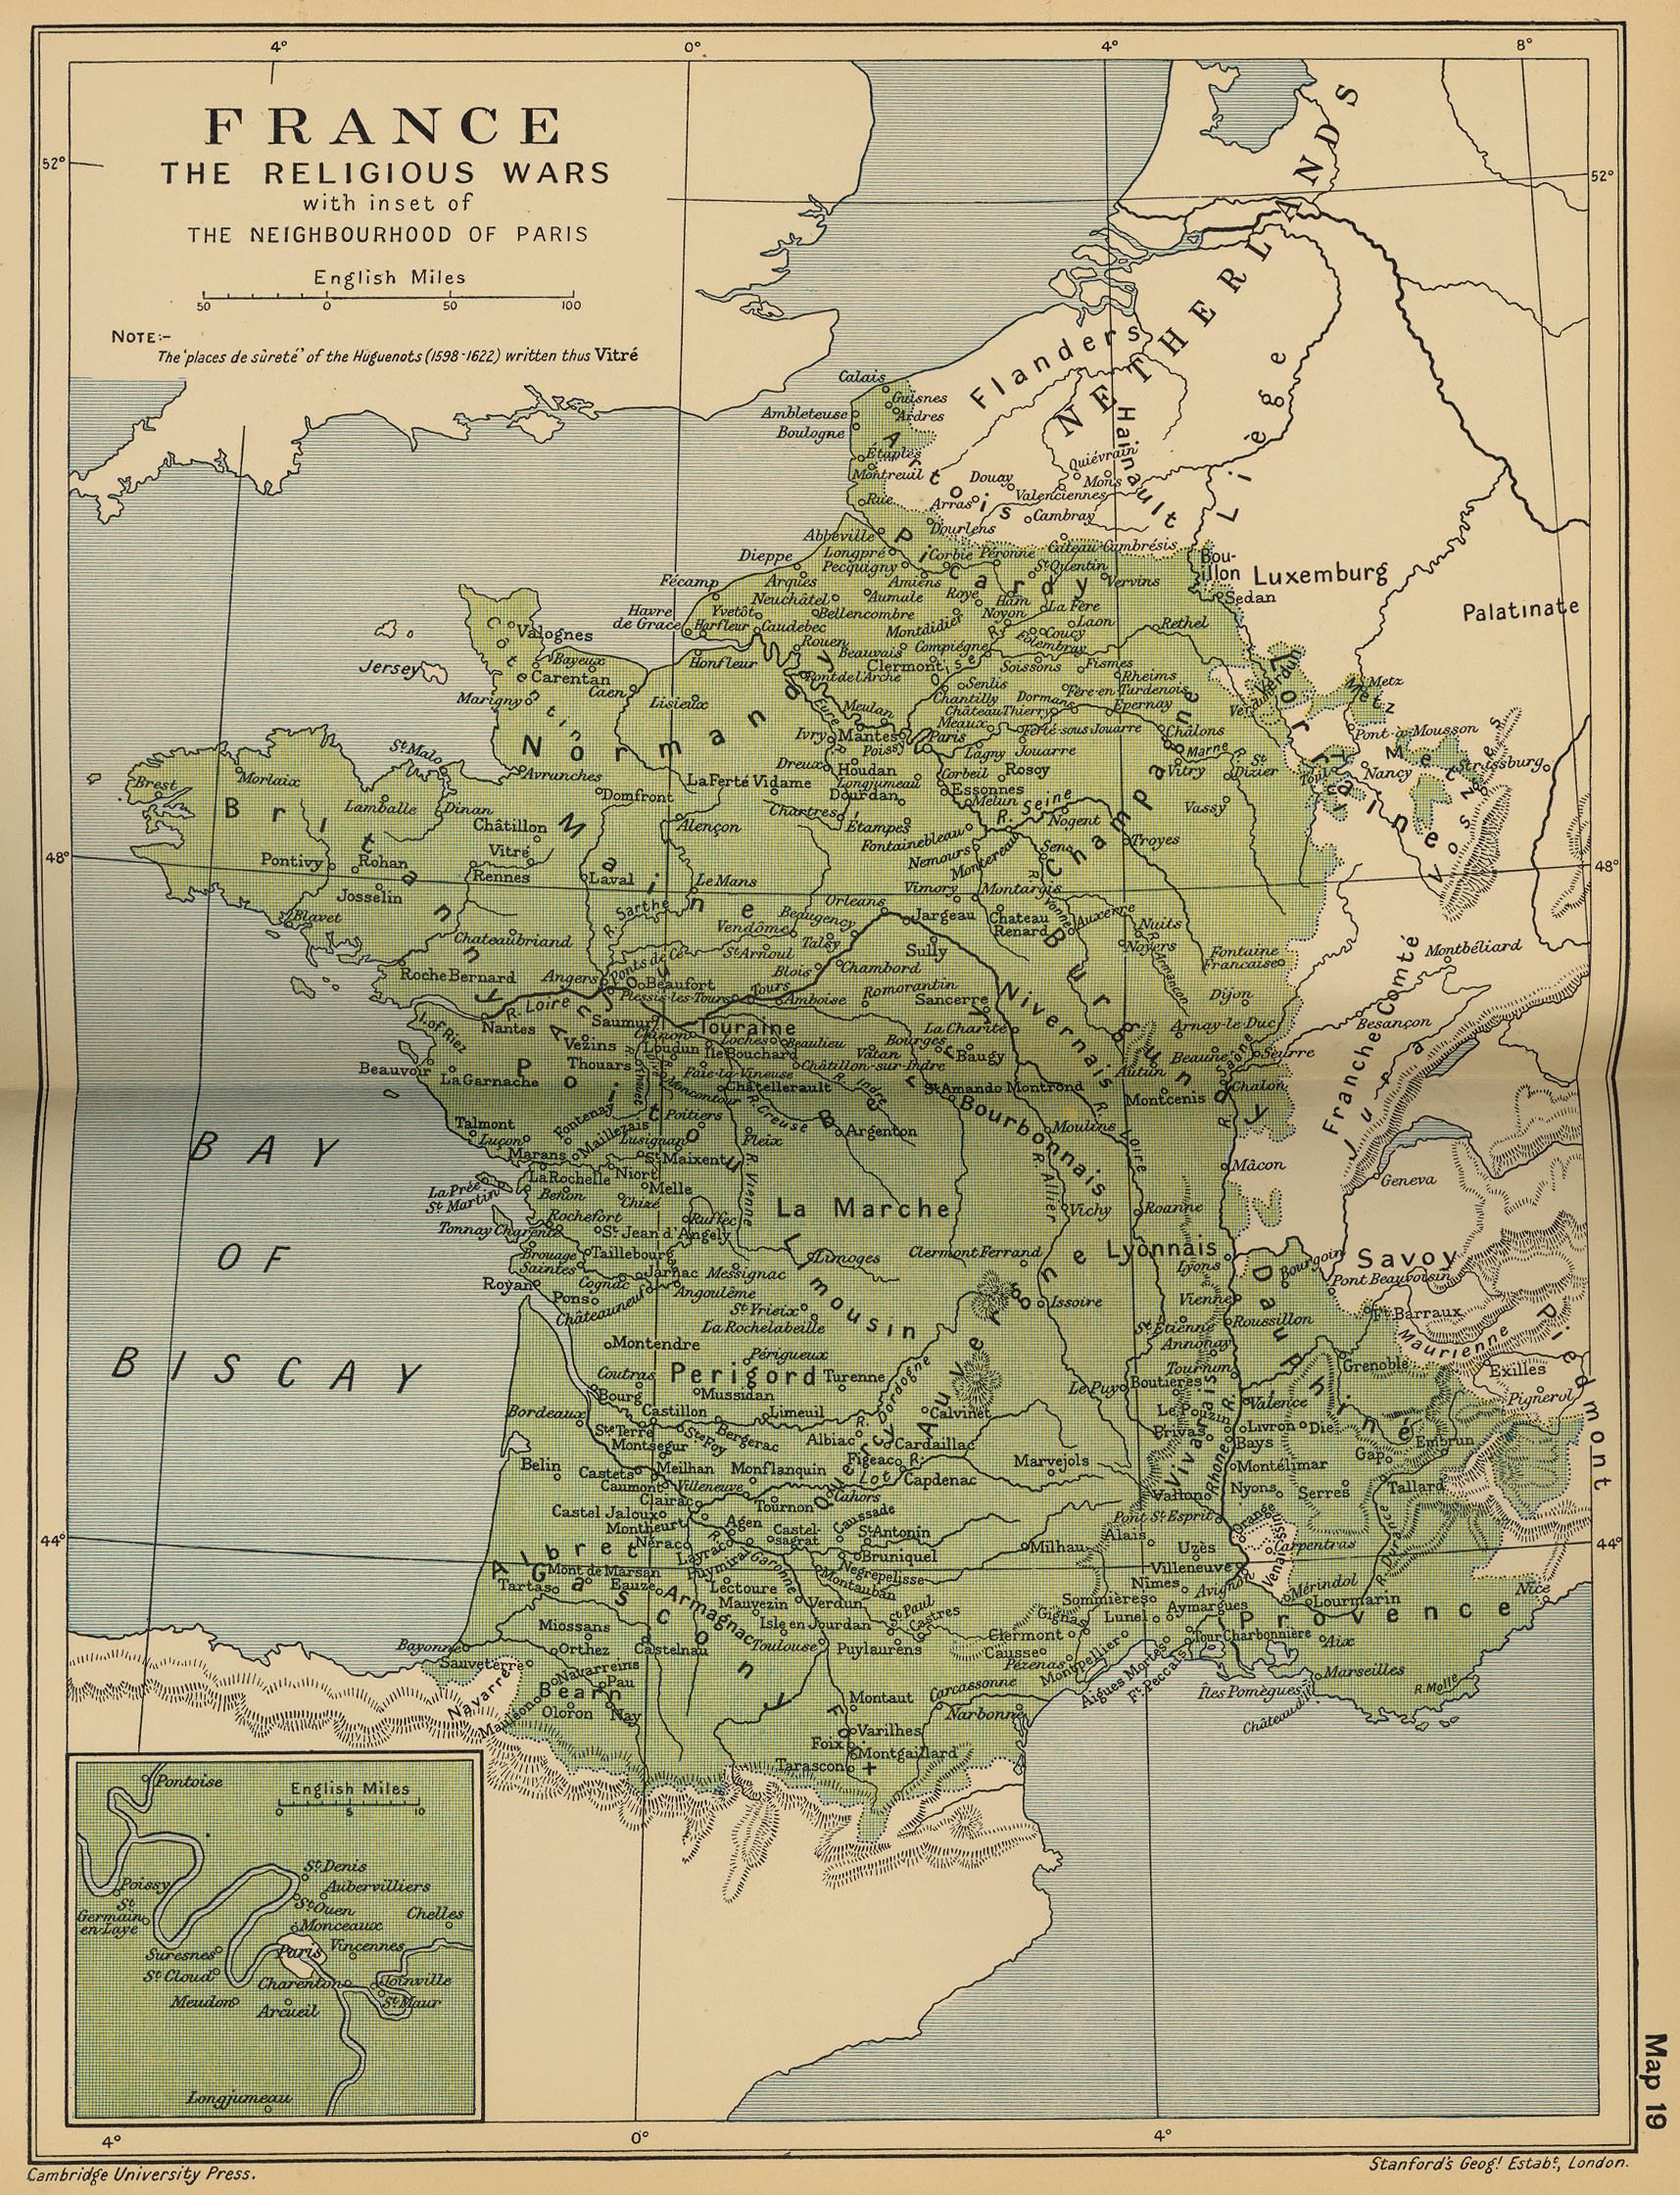 Map of France: The Religious Wars 1562-1598